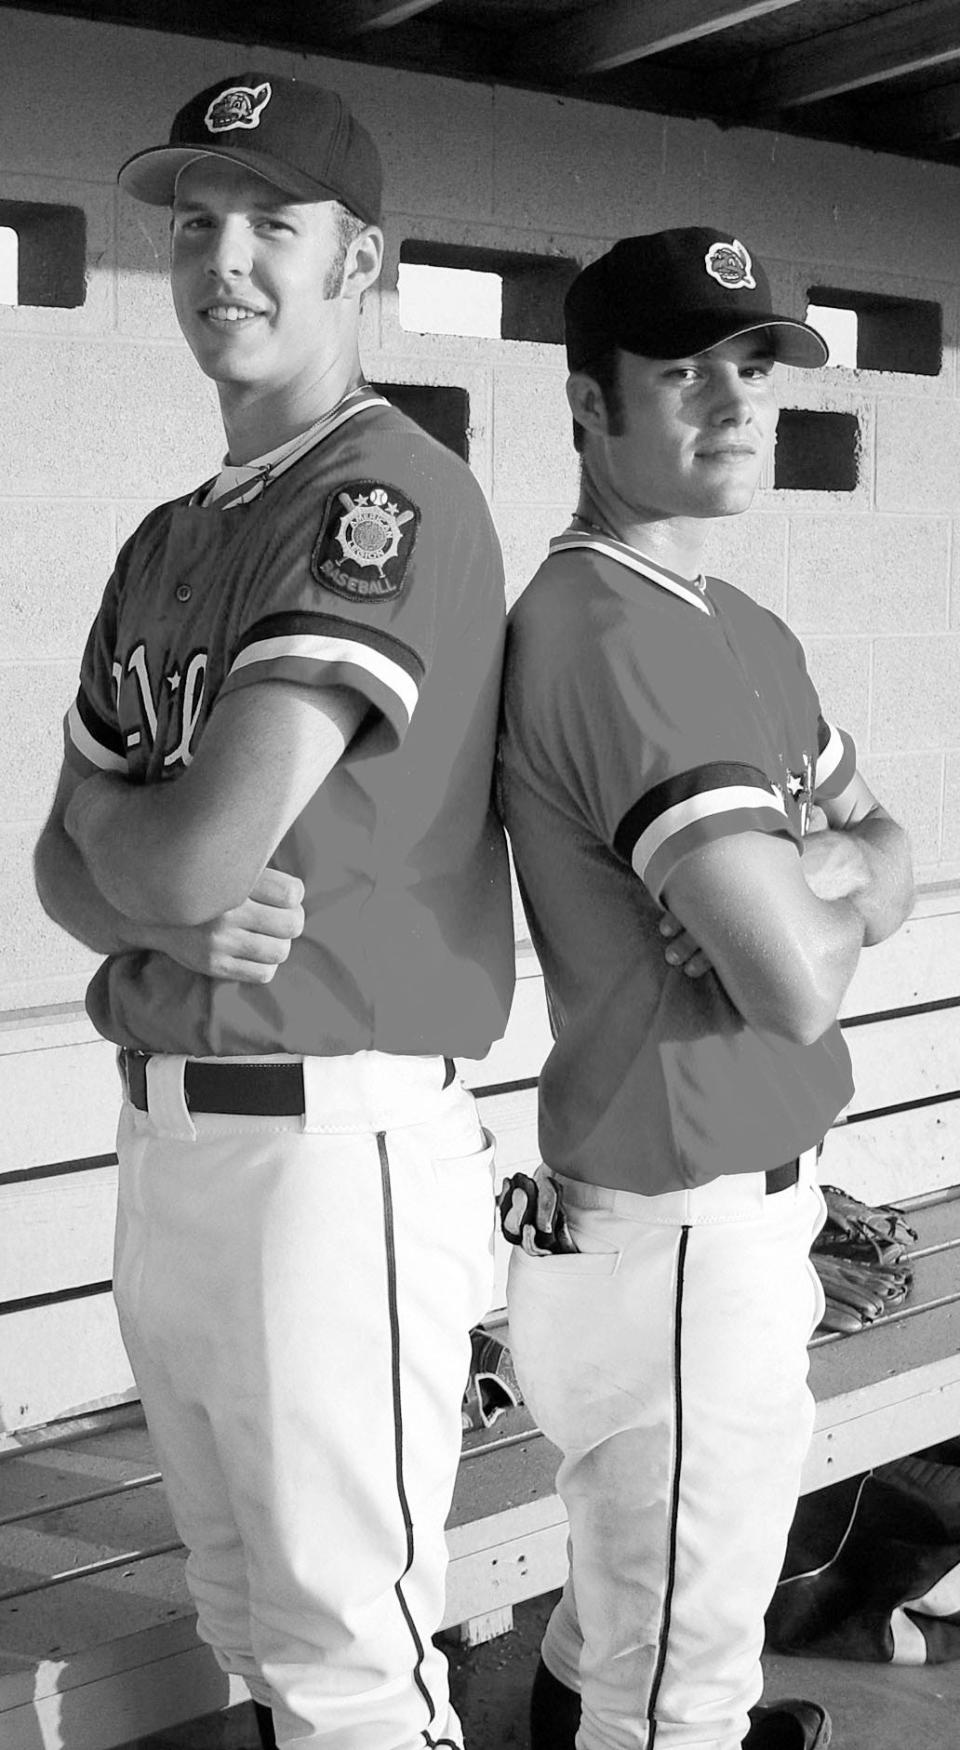 BLASTS FROM THE PAST: Bryan Kayser, left, and Lincoln Kent of the Bartlesville Doenges Ford Indians pose during an American Legion game in the early 2000's after they had blasted back-to-back homers. (Mike Tupa/Examiner-Enterprise)